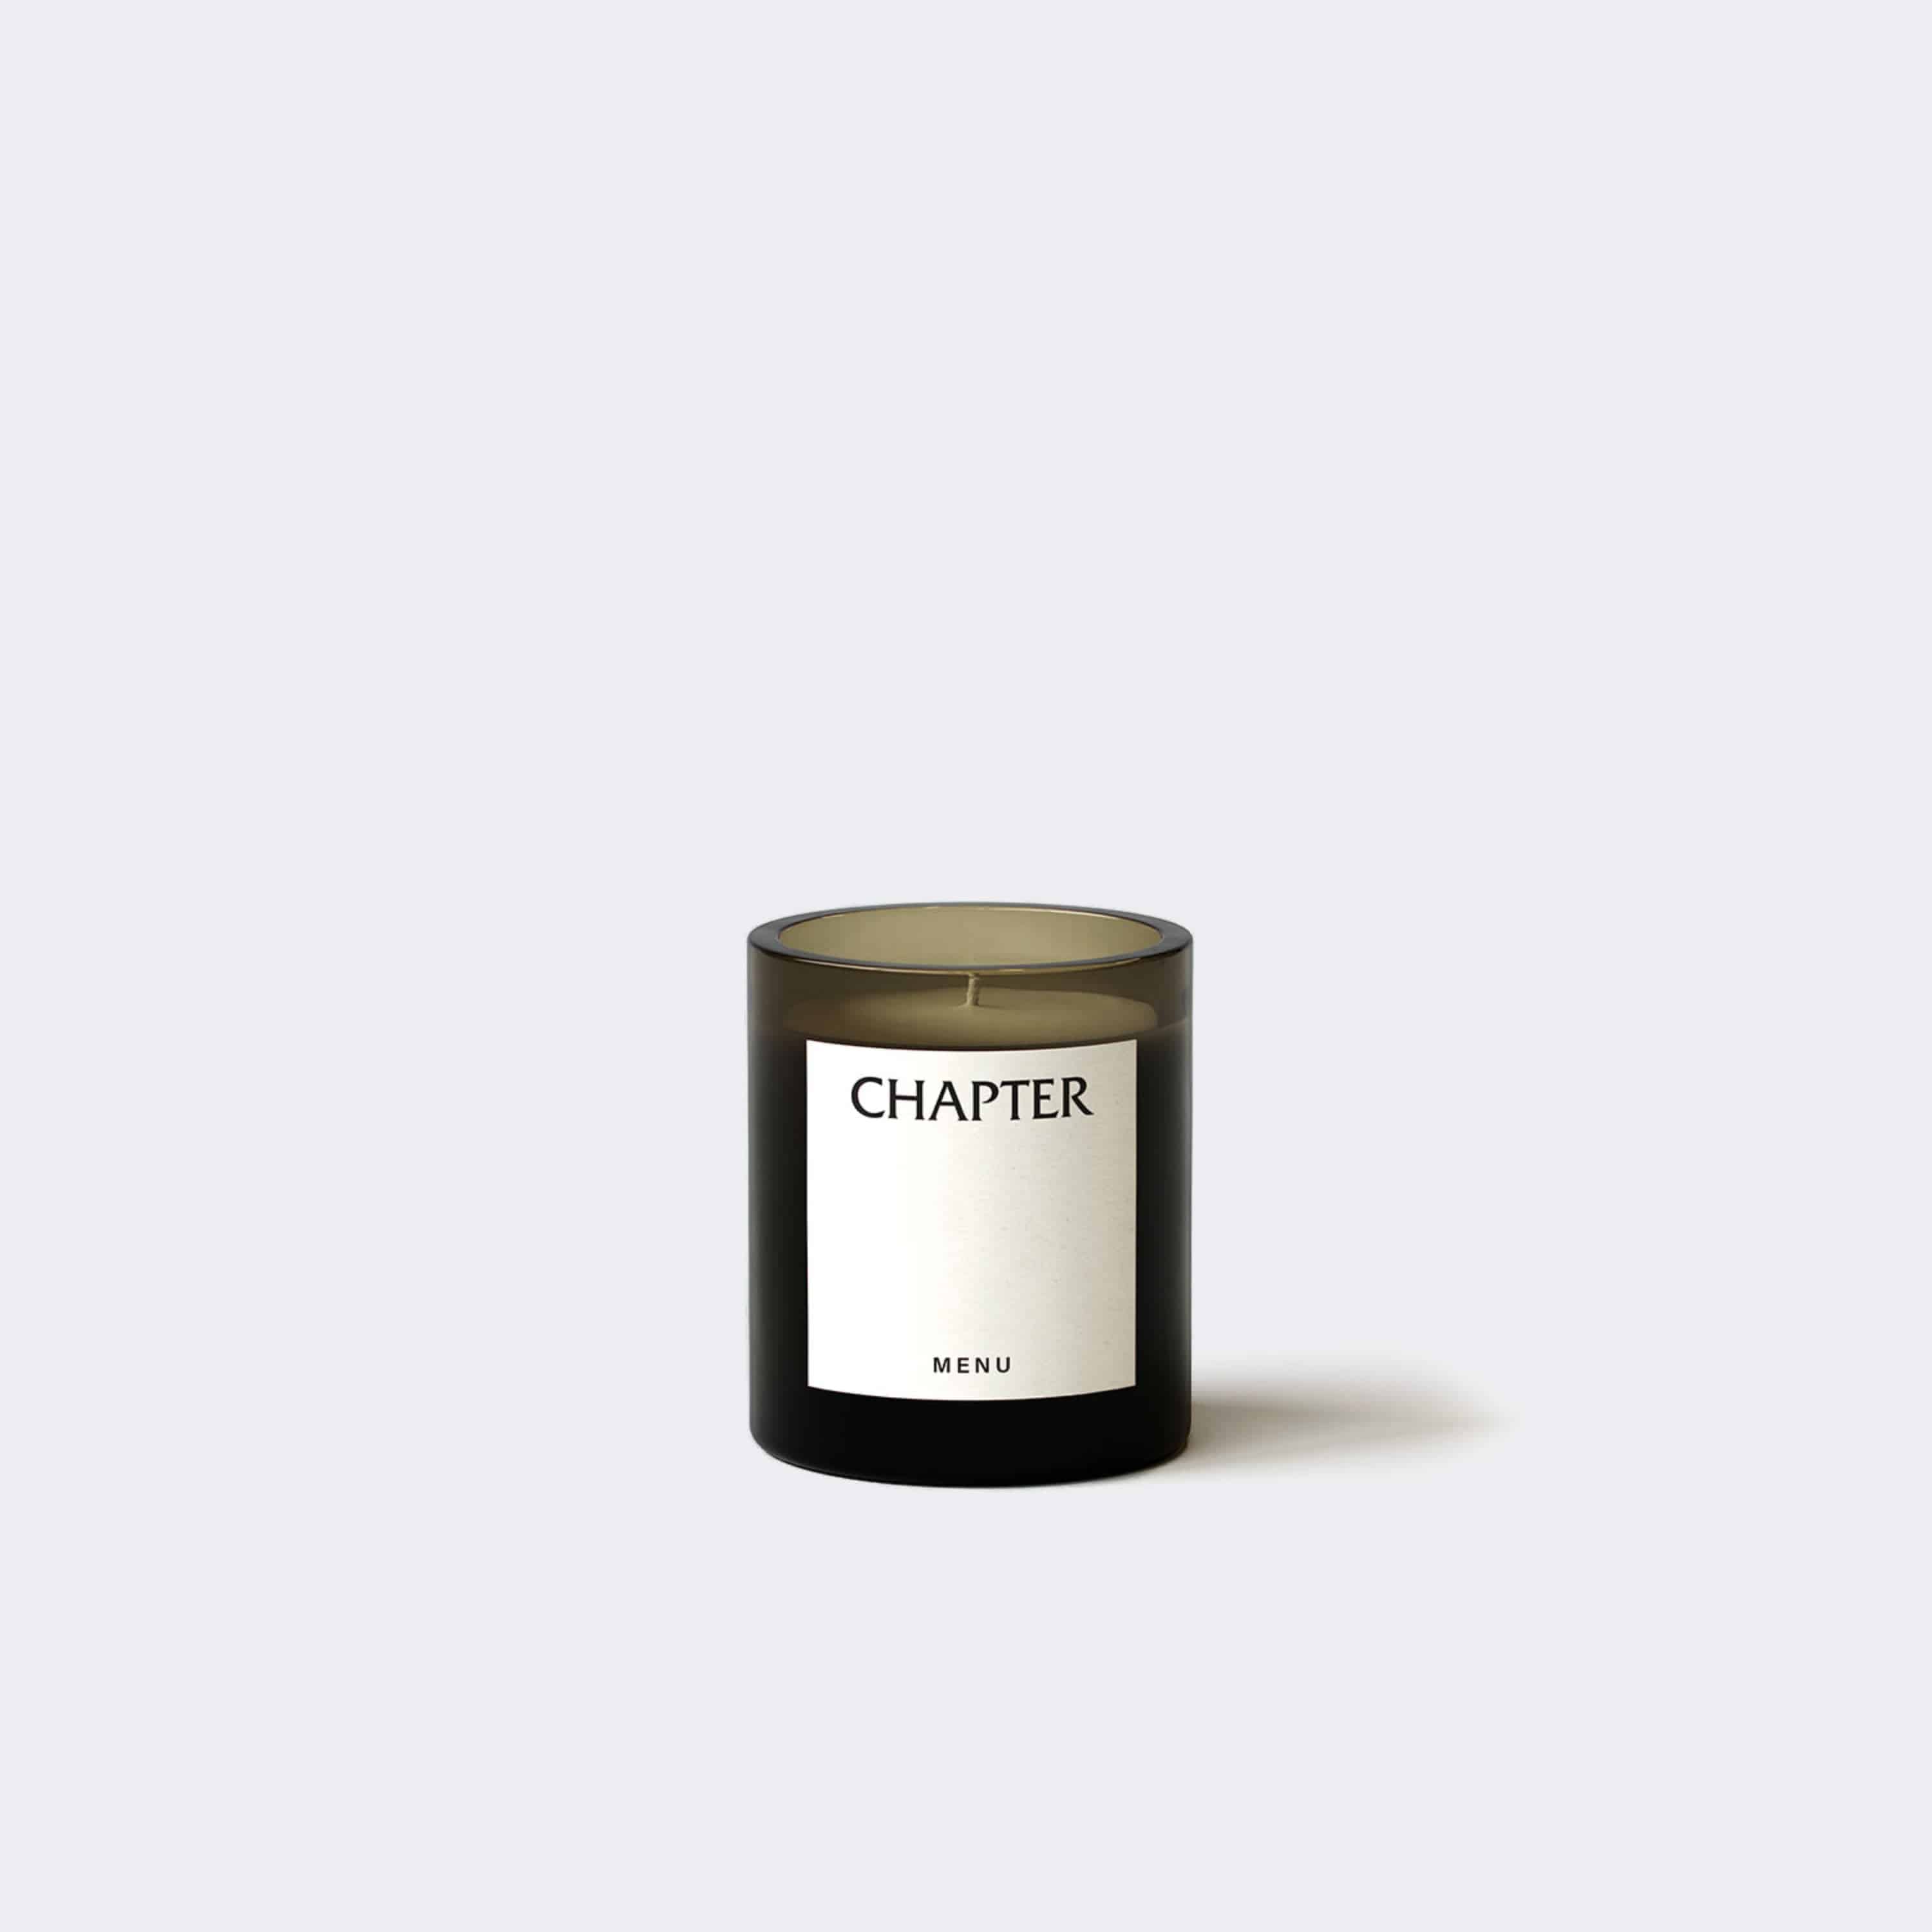 Audo Copenhagen Olfacte Scented Candle, Chapter Poured Glass Candle, 8.3 oz. - KANSO#select size_Poured Glass Candle, 8.3 oz.